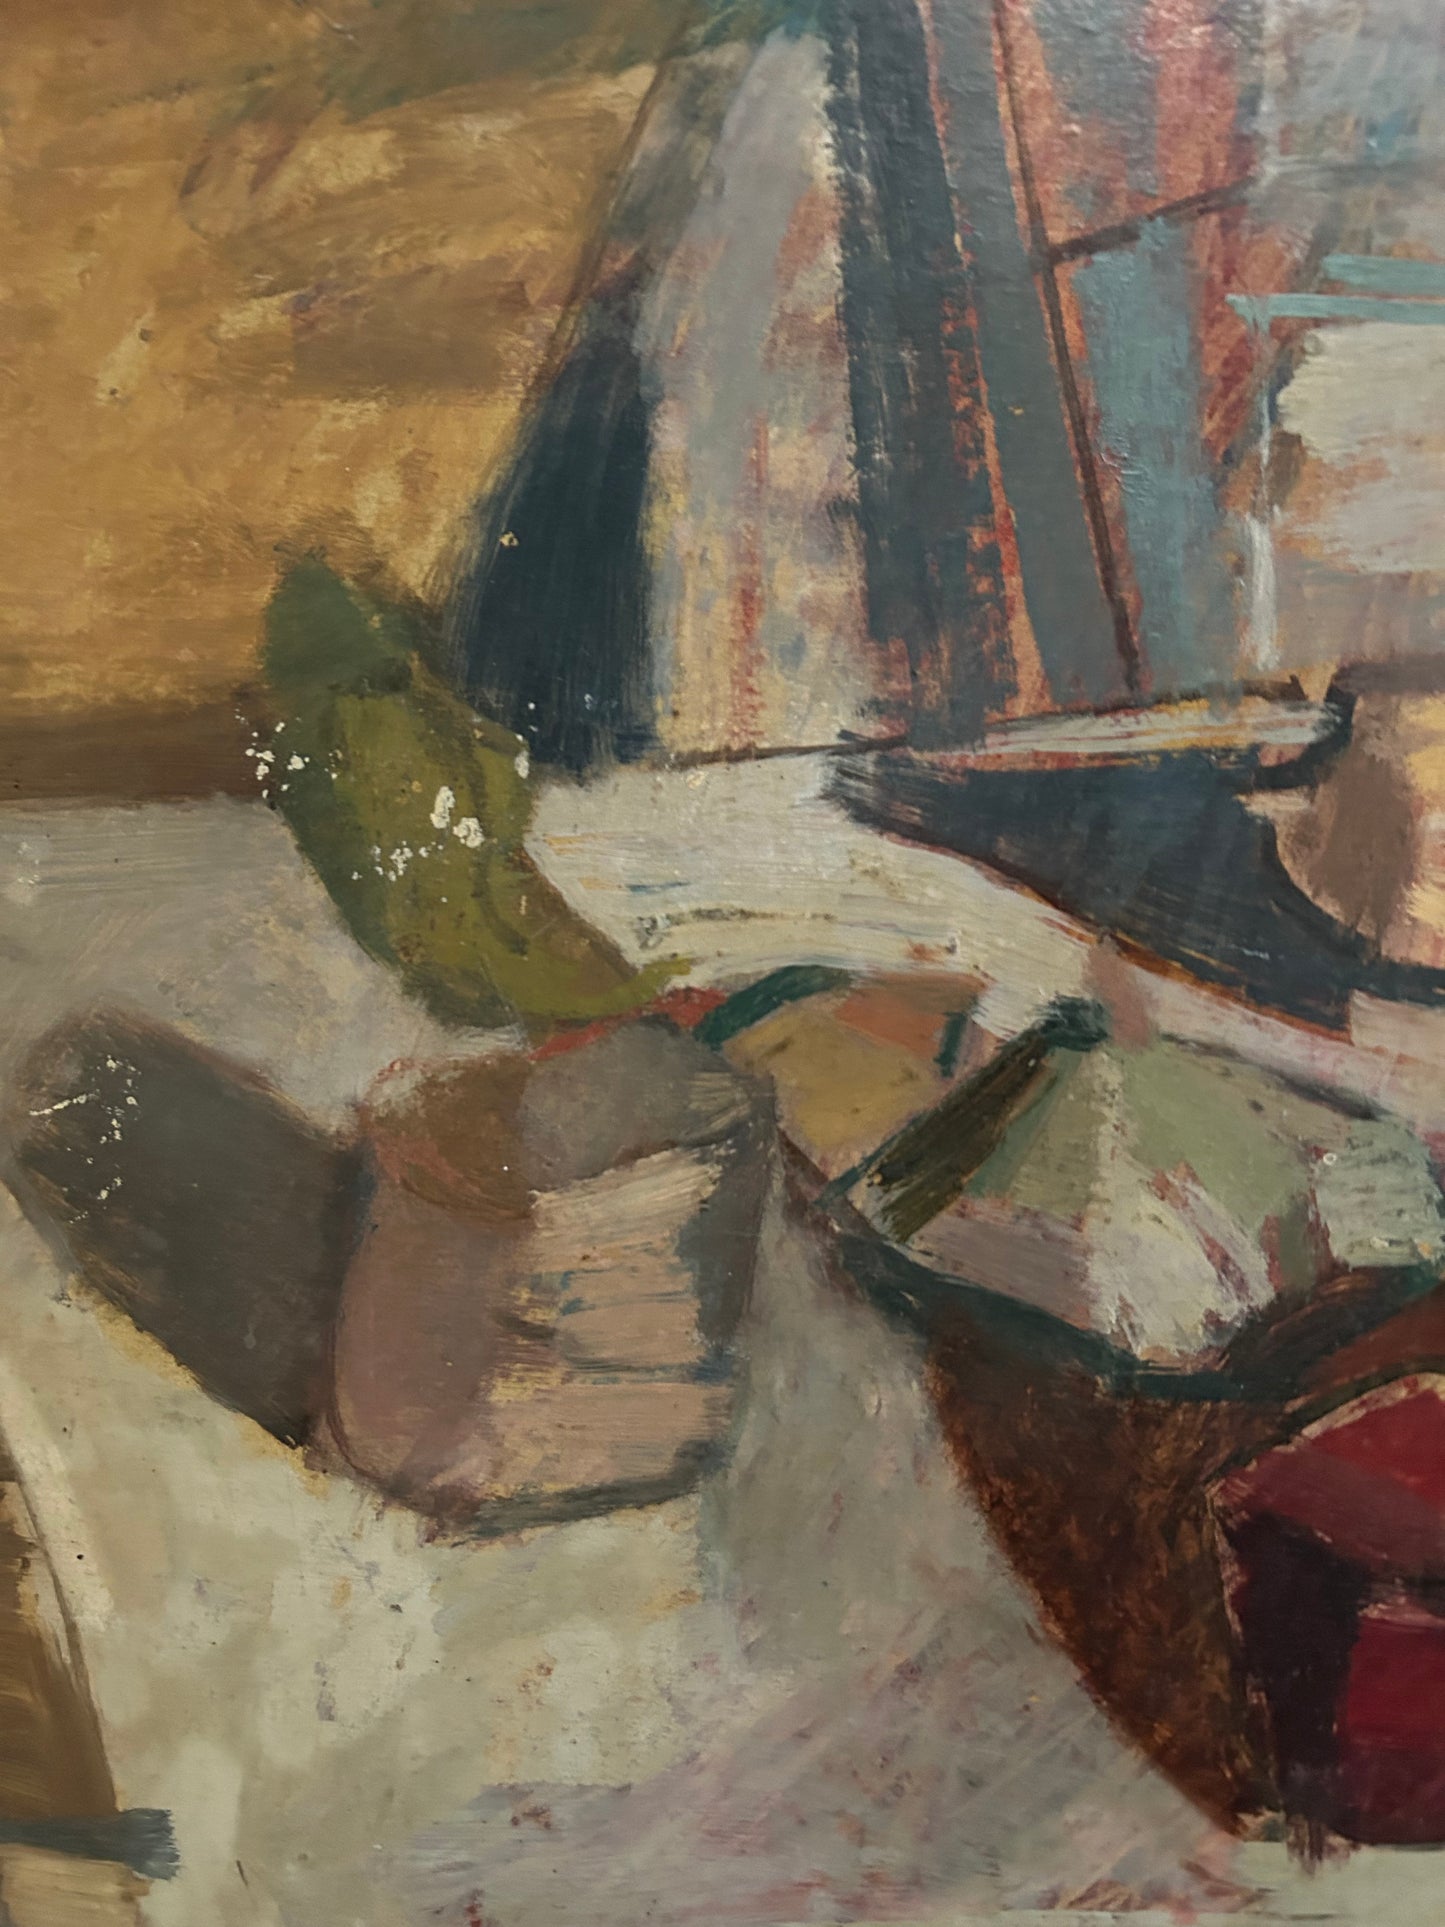 A Late 30's Cubist Still Life Very Much in the Style of George Braque